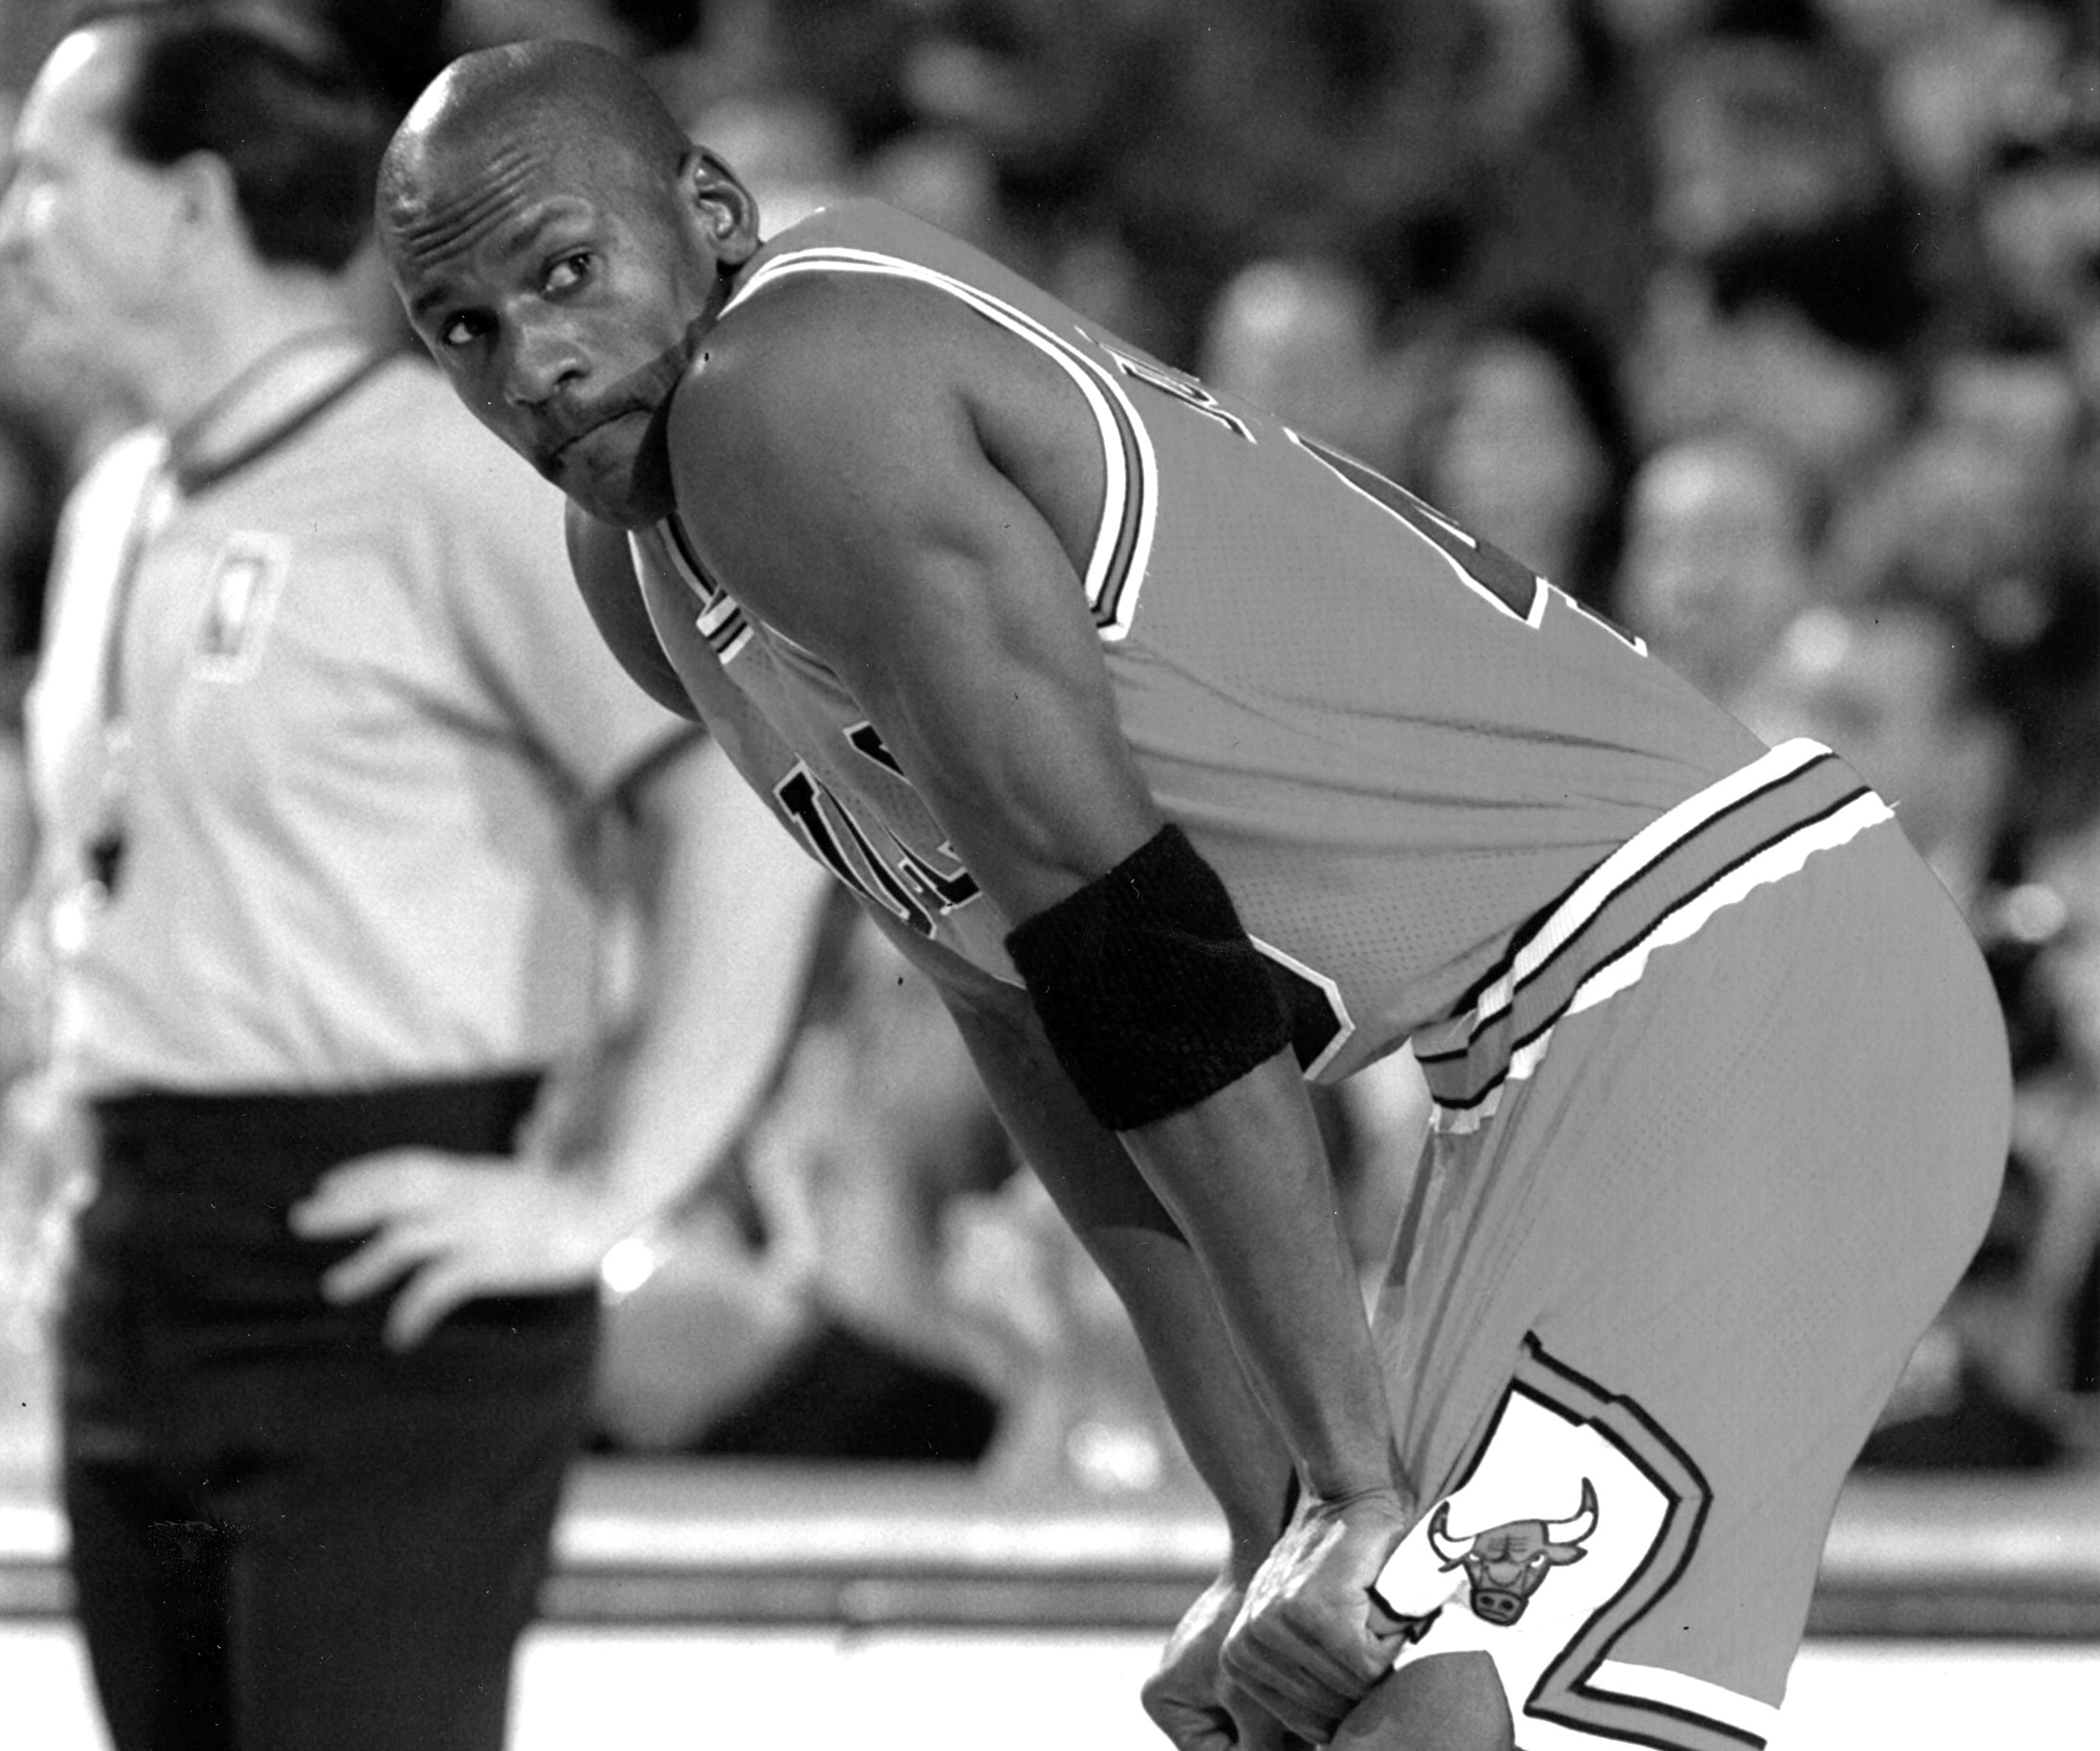 Chicago Bulls guard Michael Jordan reacts during a game against the Boston Celtics at the Boston Garden, March 22, 1995.  | Lane Turner/The Boston Globe via Getty Images.